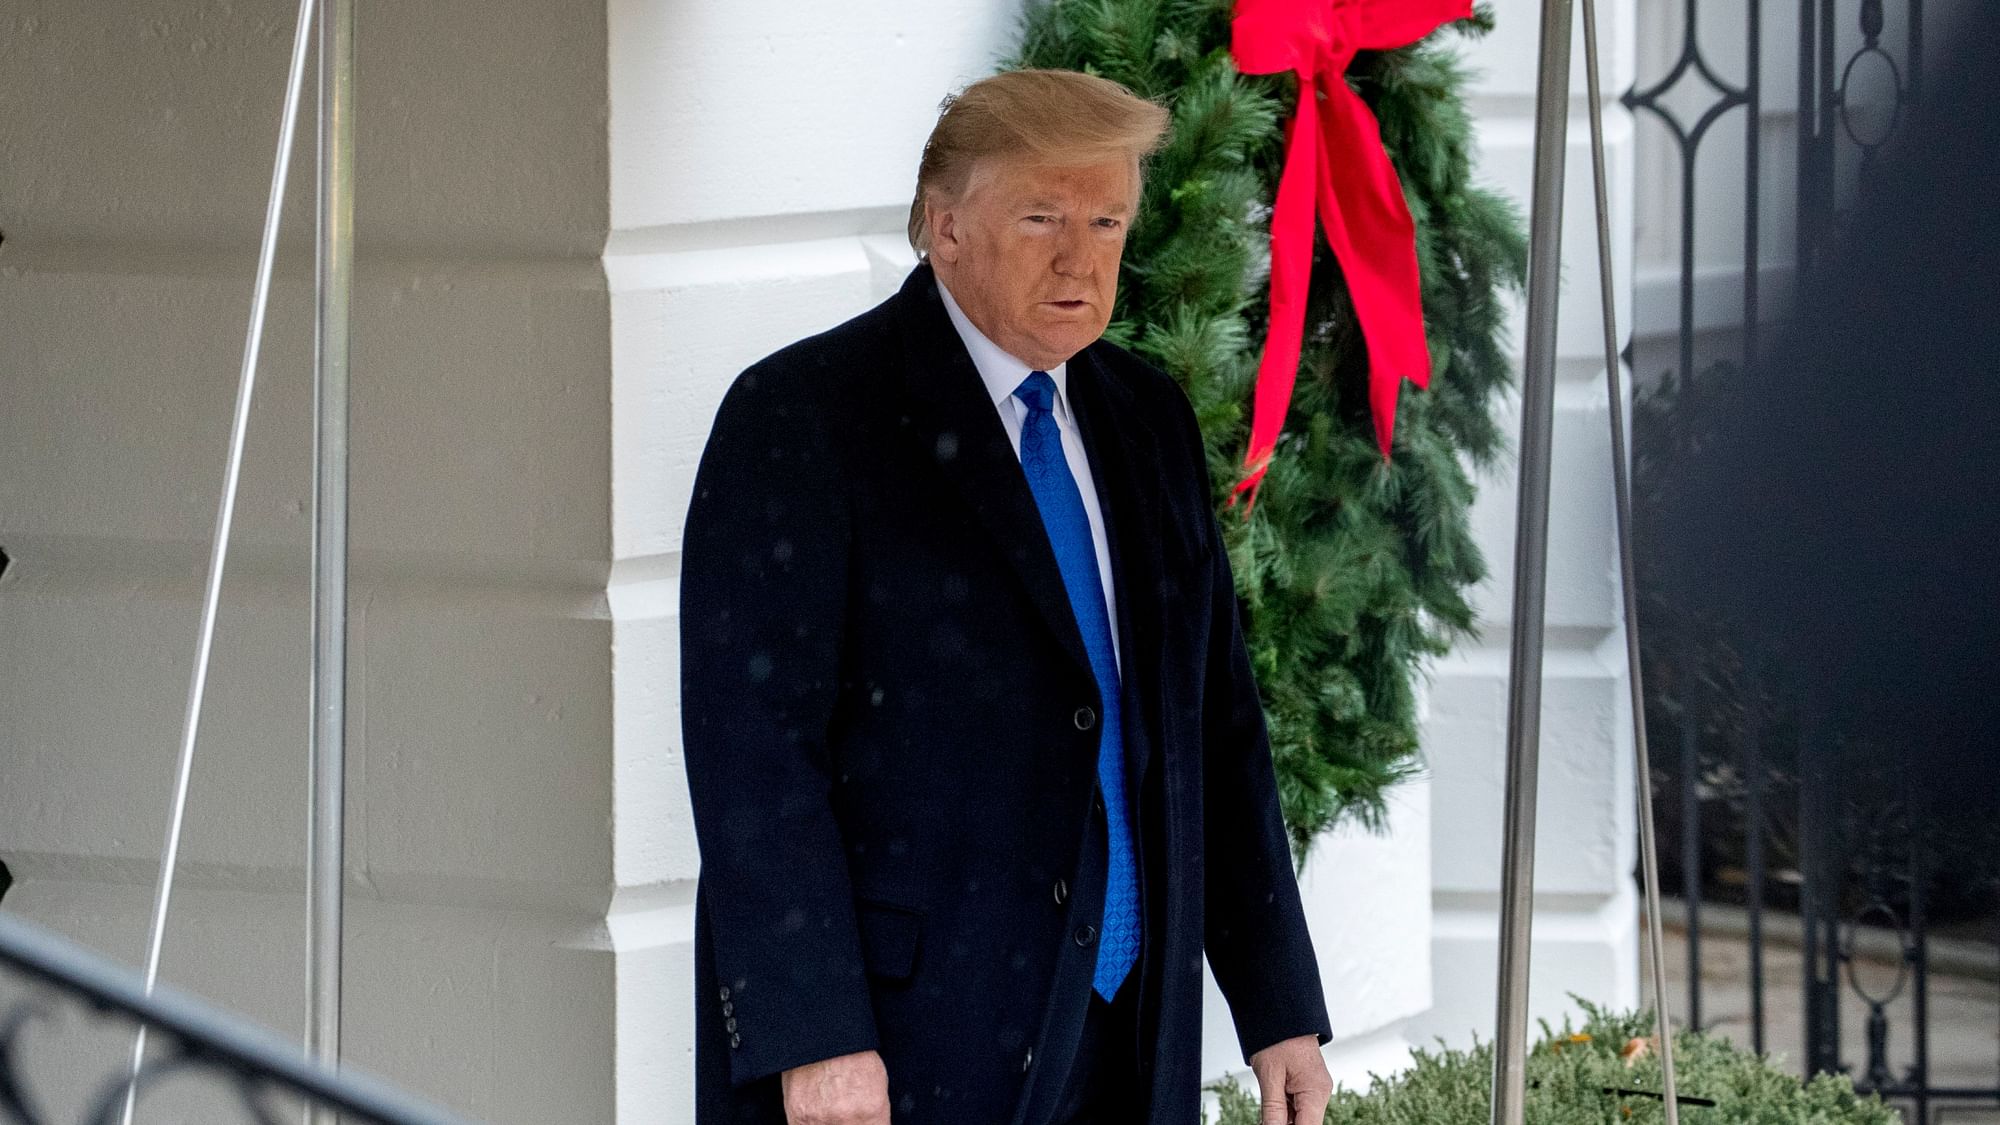 President Donald Trump walks towards members of the media before boarding Marine One on the south Lawn of the White House in Washington, on  2 December.